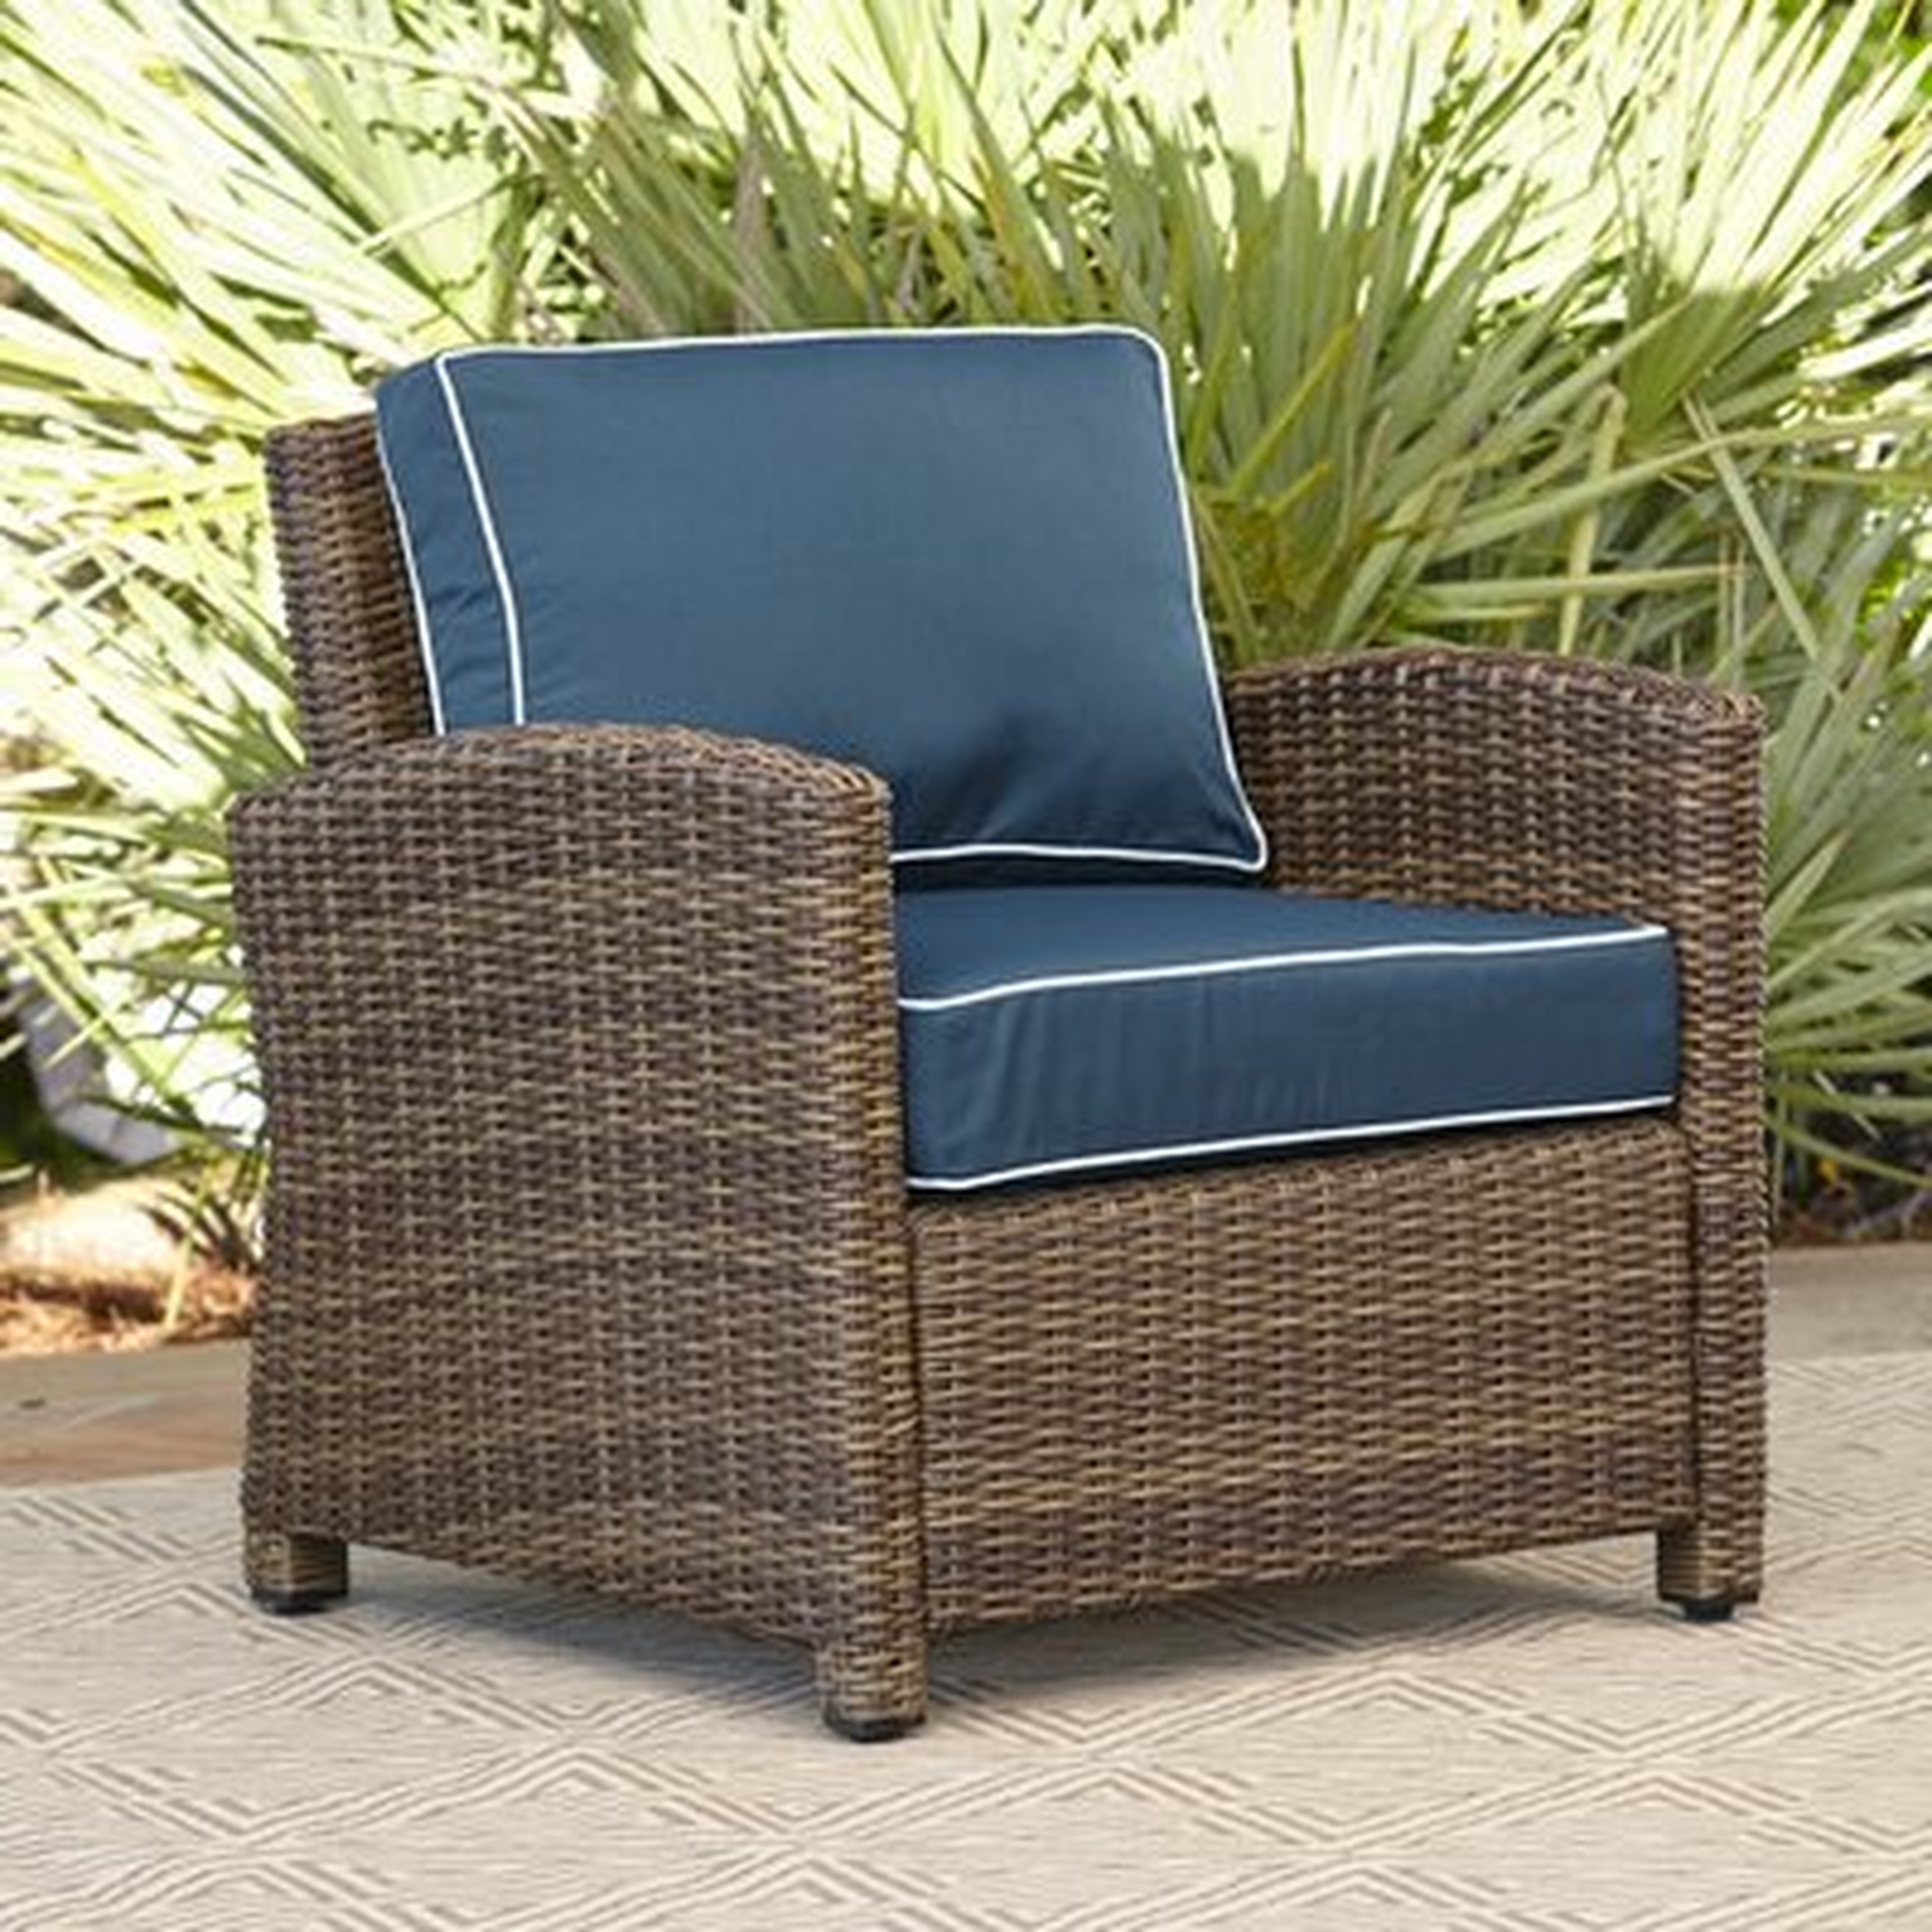 Lawson Patio Chair with Cushions - set of 2 - Birch Lane